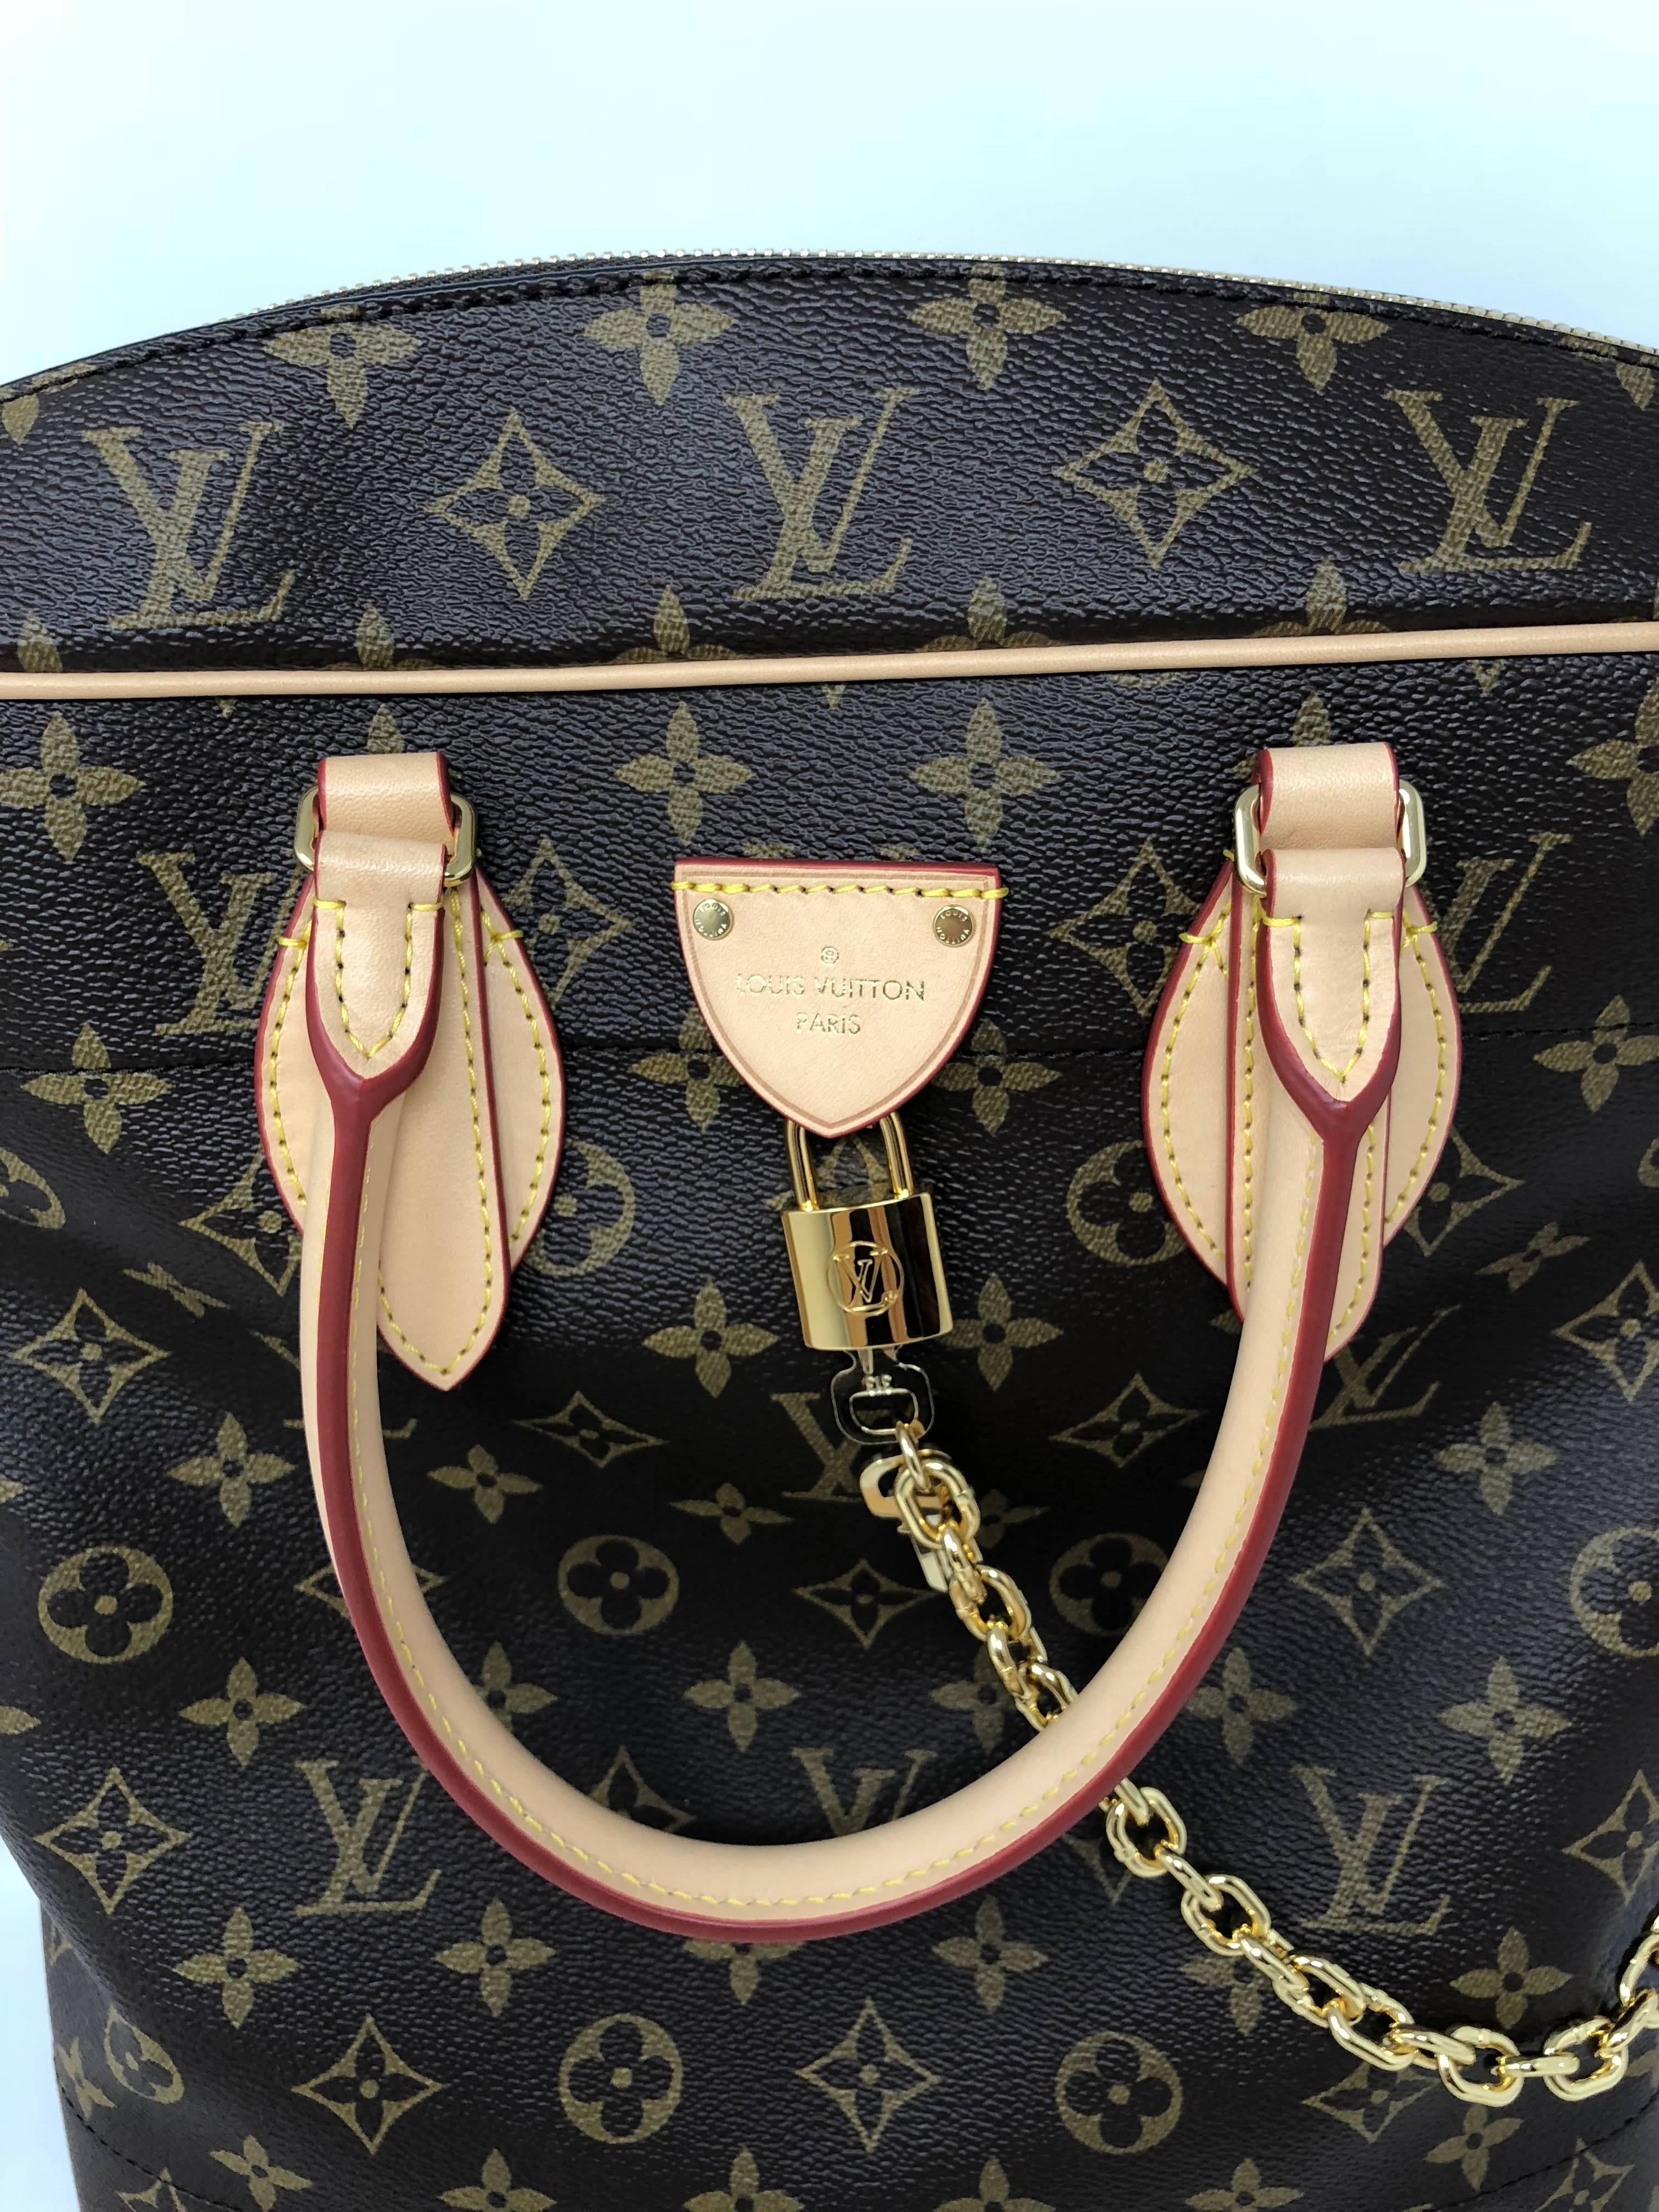 Louis Vuitton Carry All Monogram Shoulder Bag. Runway 2018 Collection. Sold out and hard to find. Limited edition inspired by the House travel heritage. Handles made with signature Toron leather handles and bag crafted with monogram canvas. The new